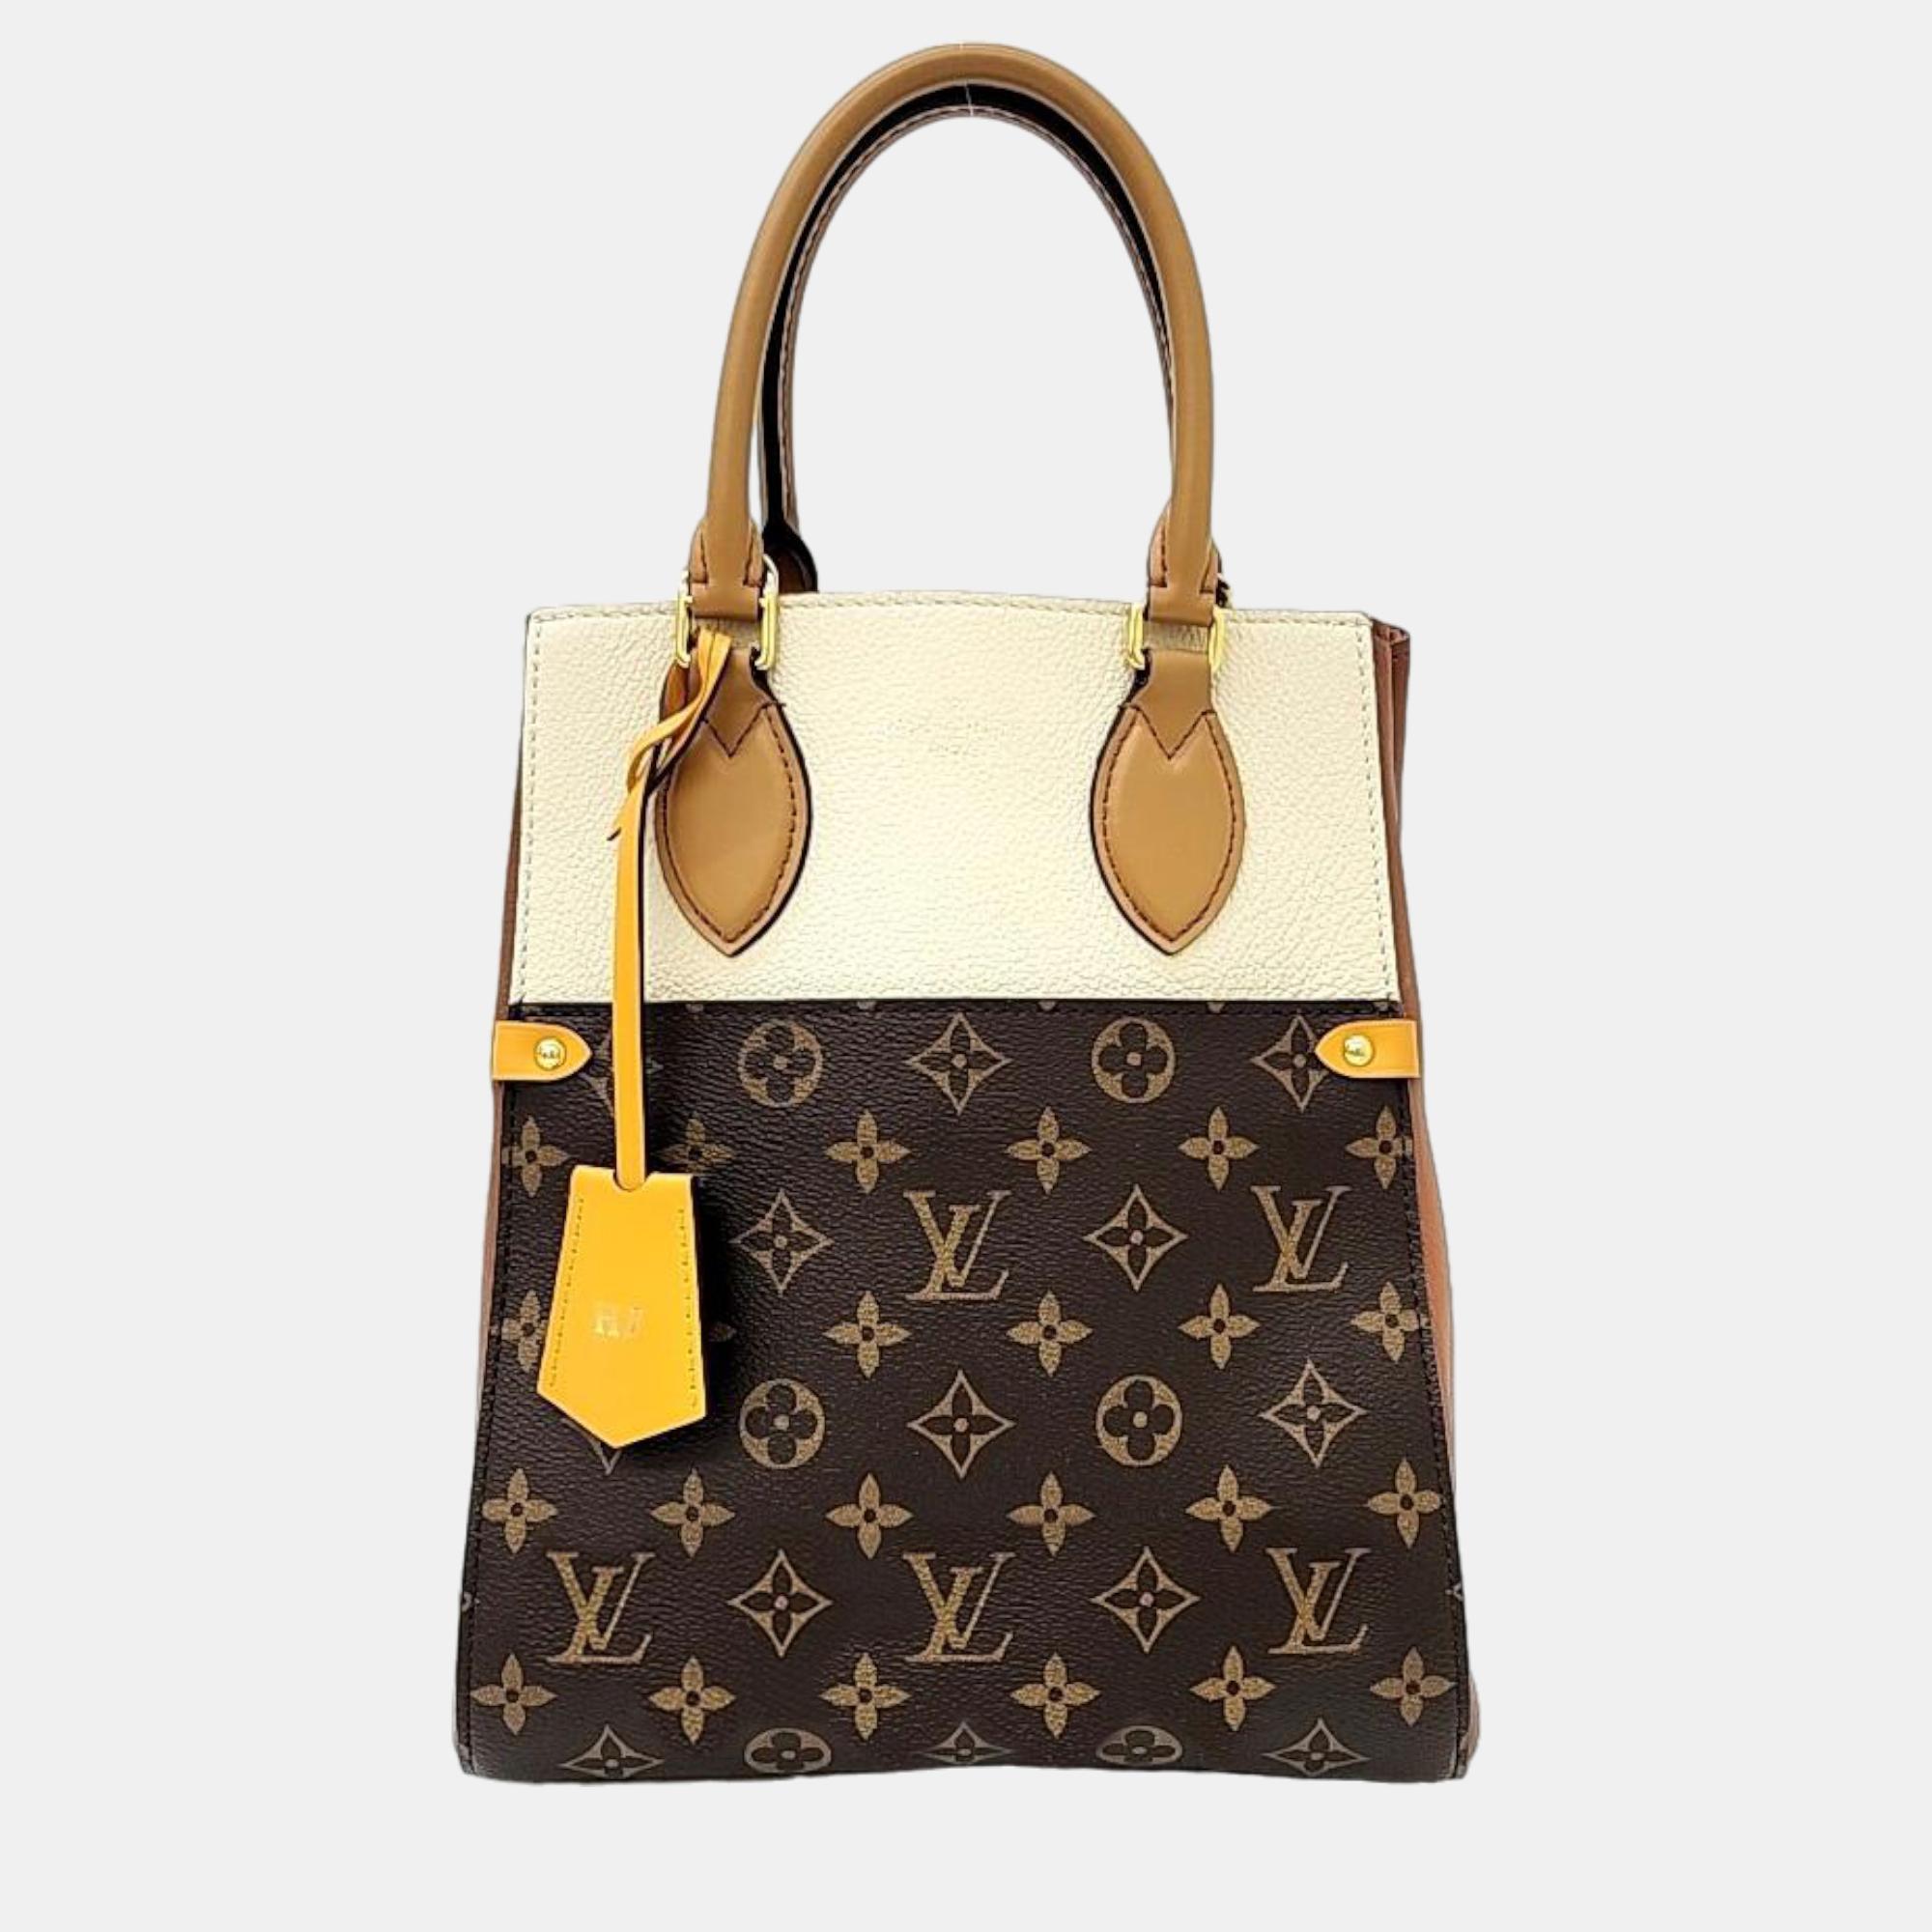 Used Louis Vuitton Bags & Pre Owned Louis Vuitton Bags